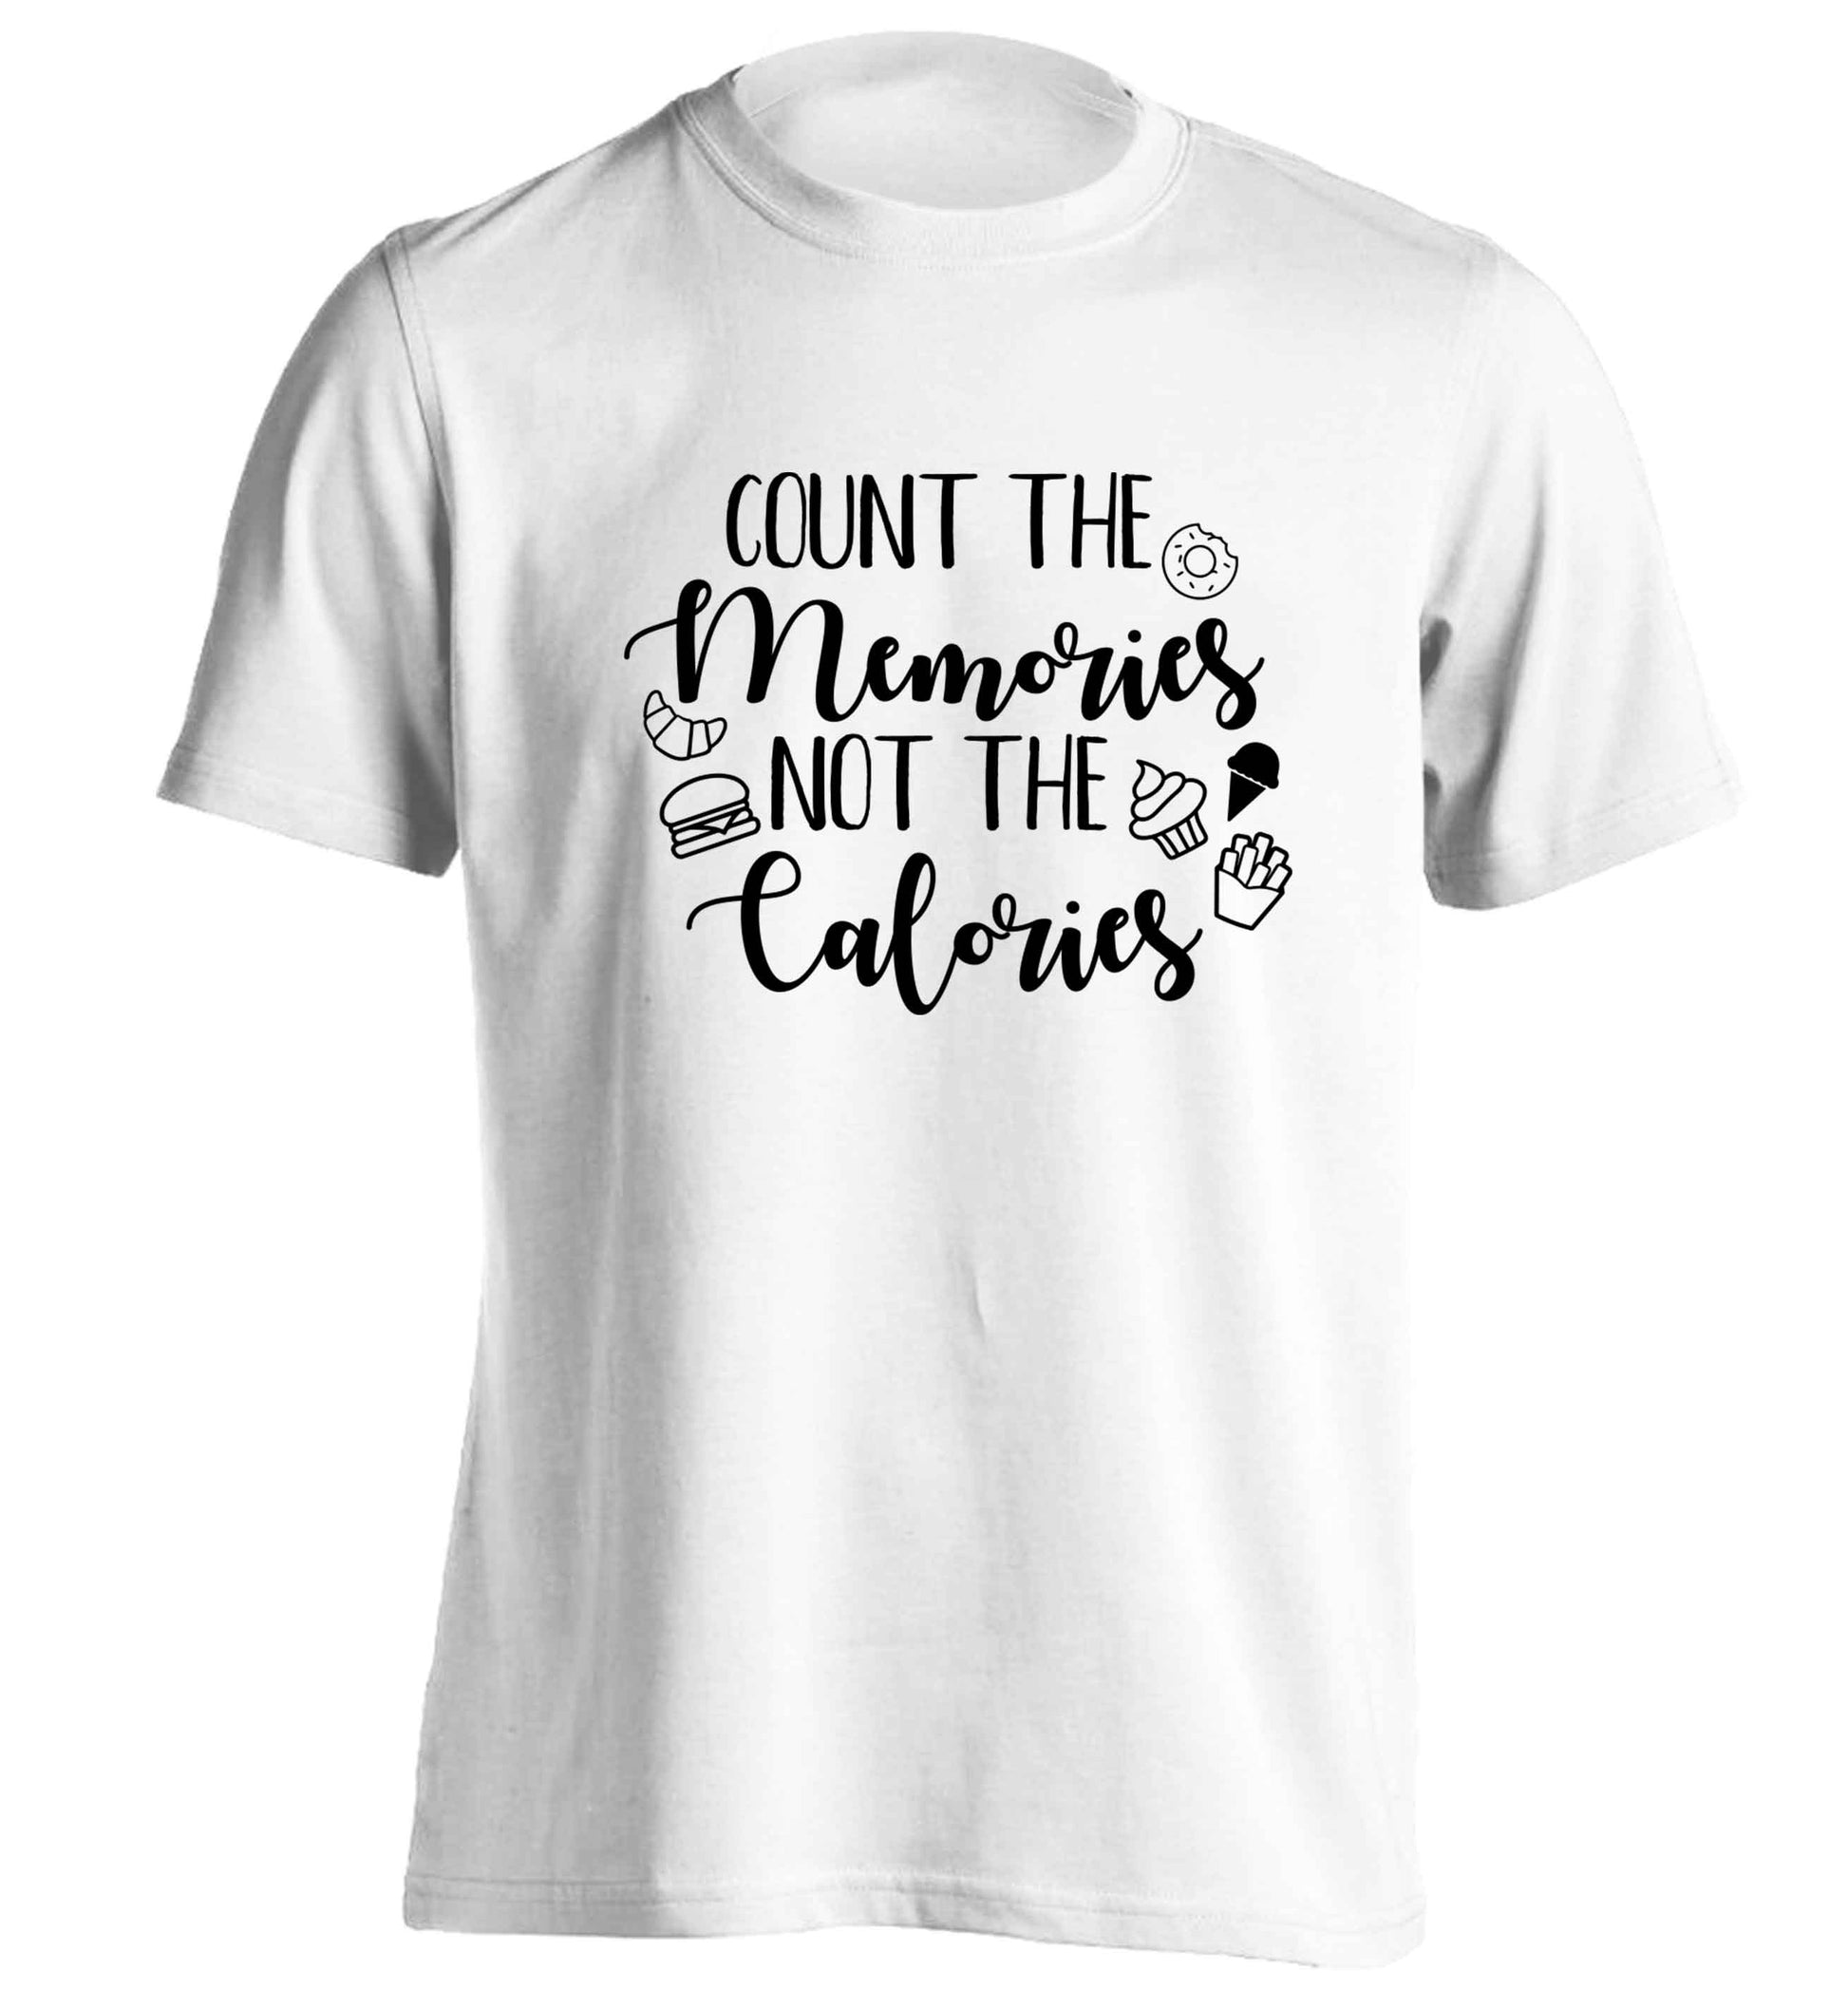 Count the memories not the calories adults unisex white Tshirt 2XL